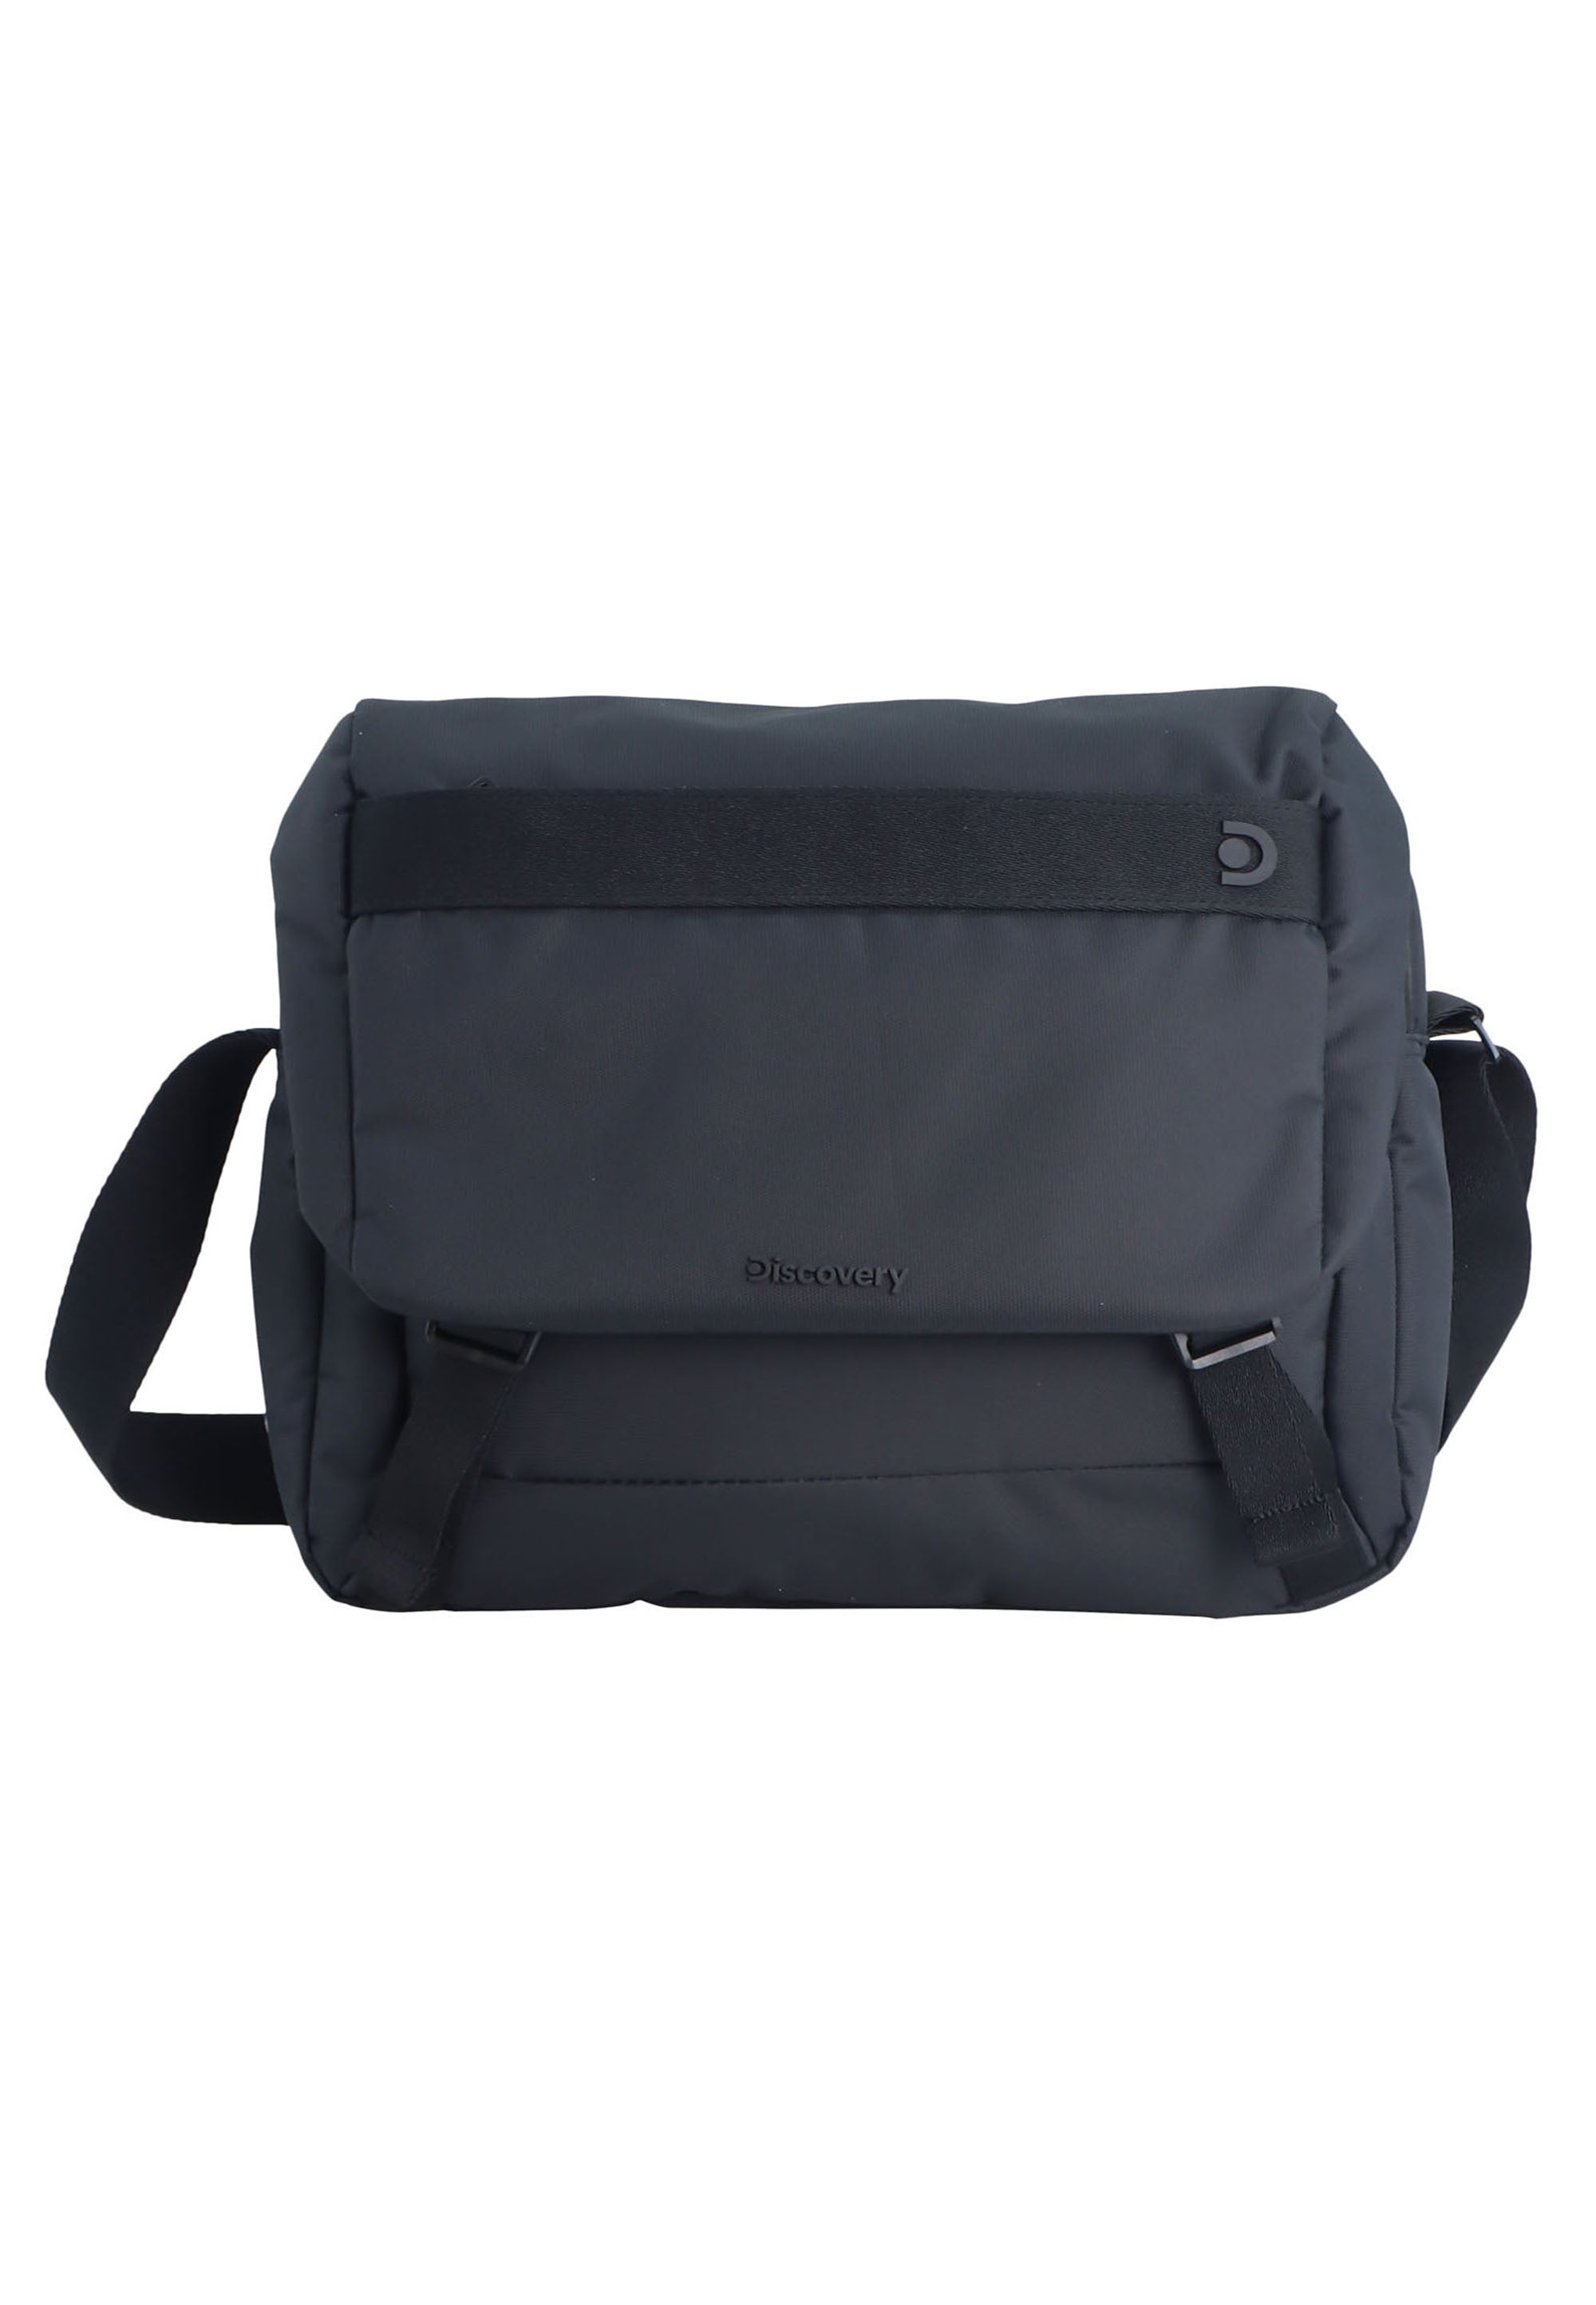 Discovery Downtown Laptop Messenger Tasche